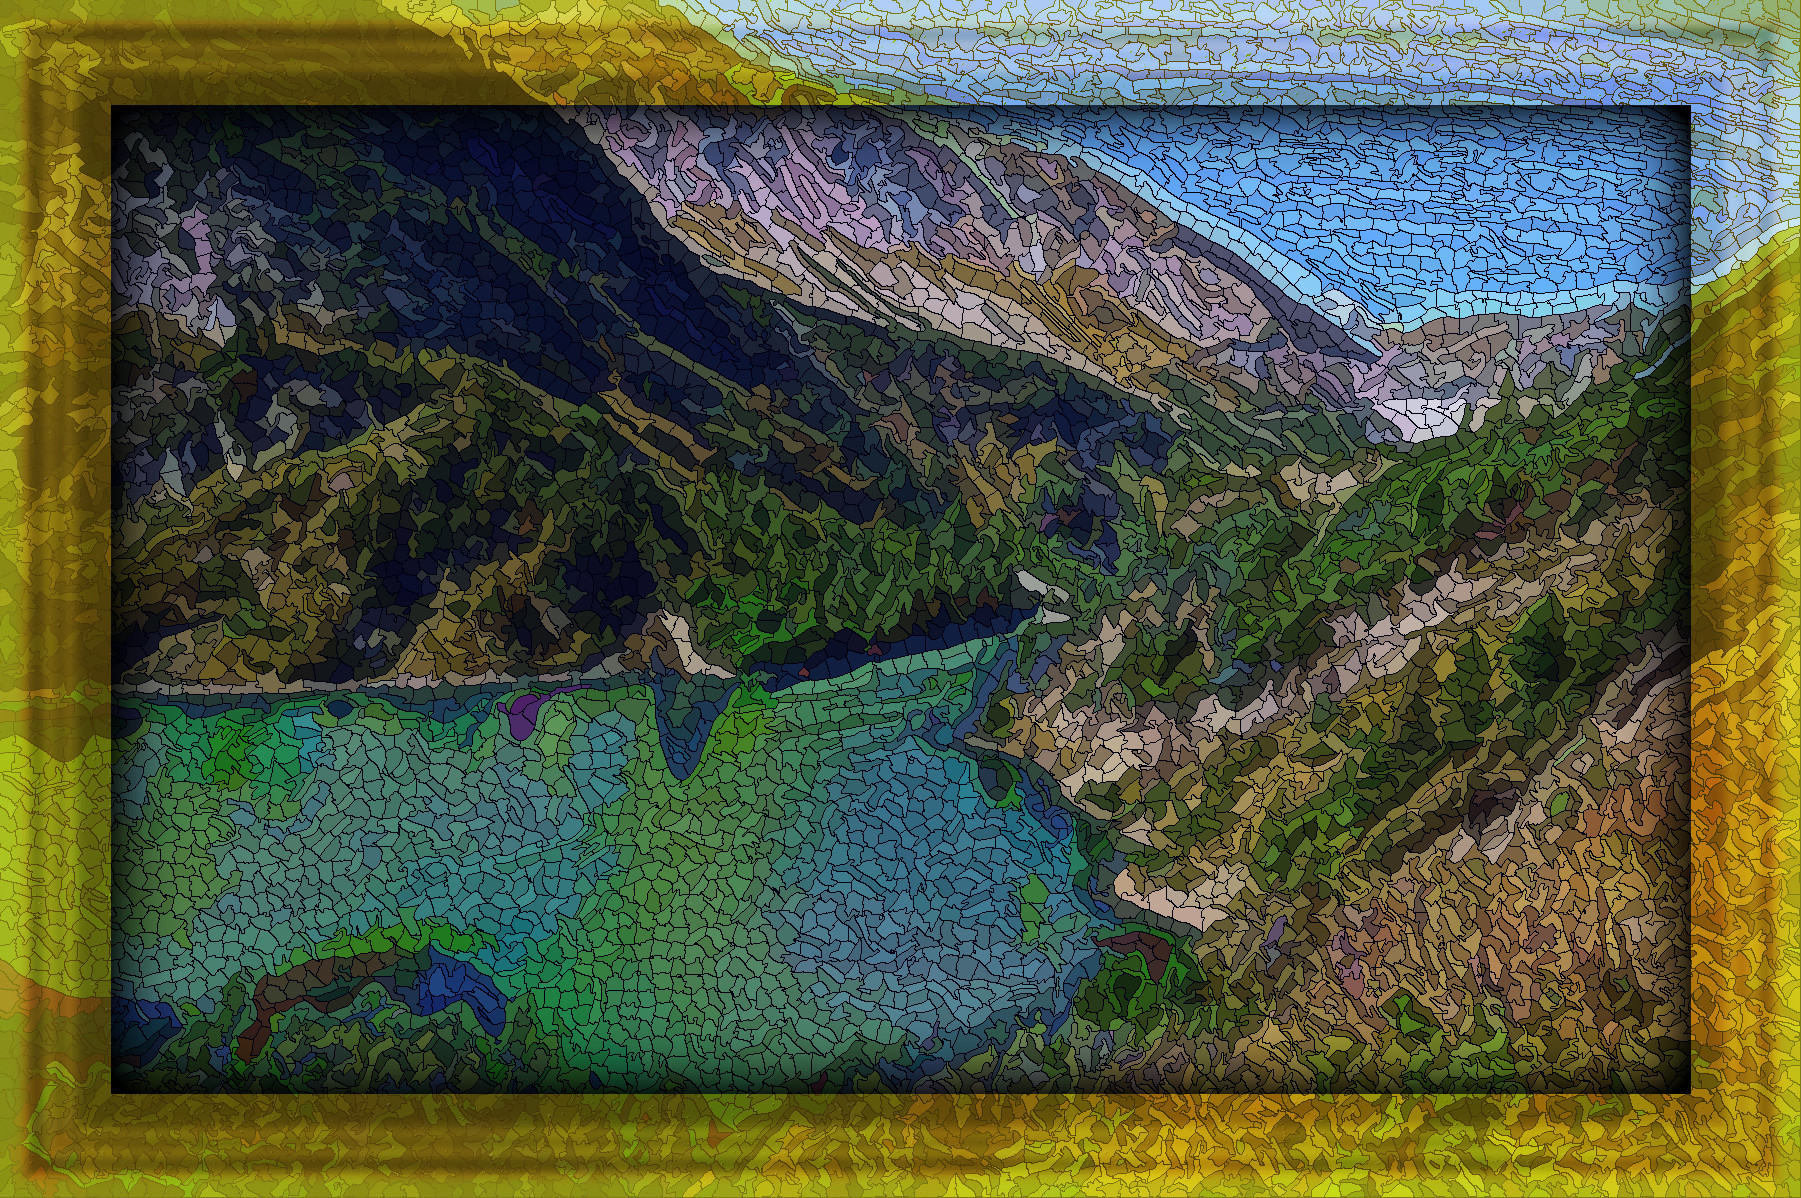 2021-08-01 10-19-38 mountain_002 with JVID effect J (SuperPixel Graphic).jpg